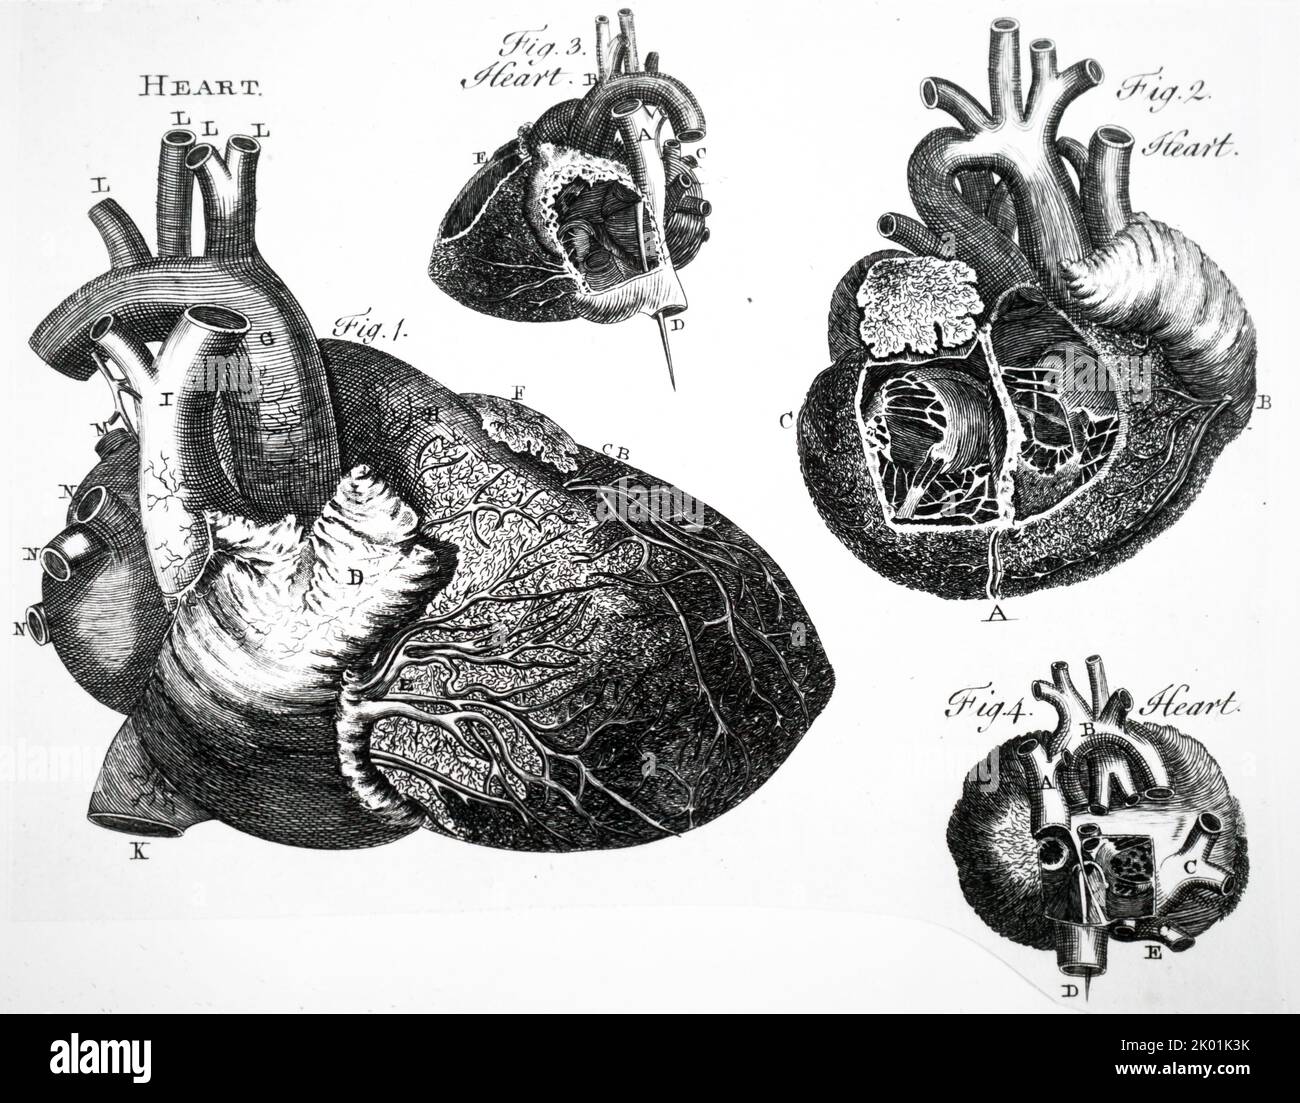 Human heart. From The Complete Dictionary of Arts and Sciences, London, 1764. Stock Photo